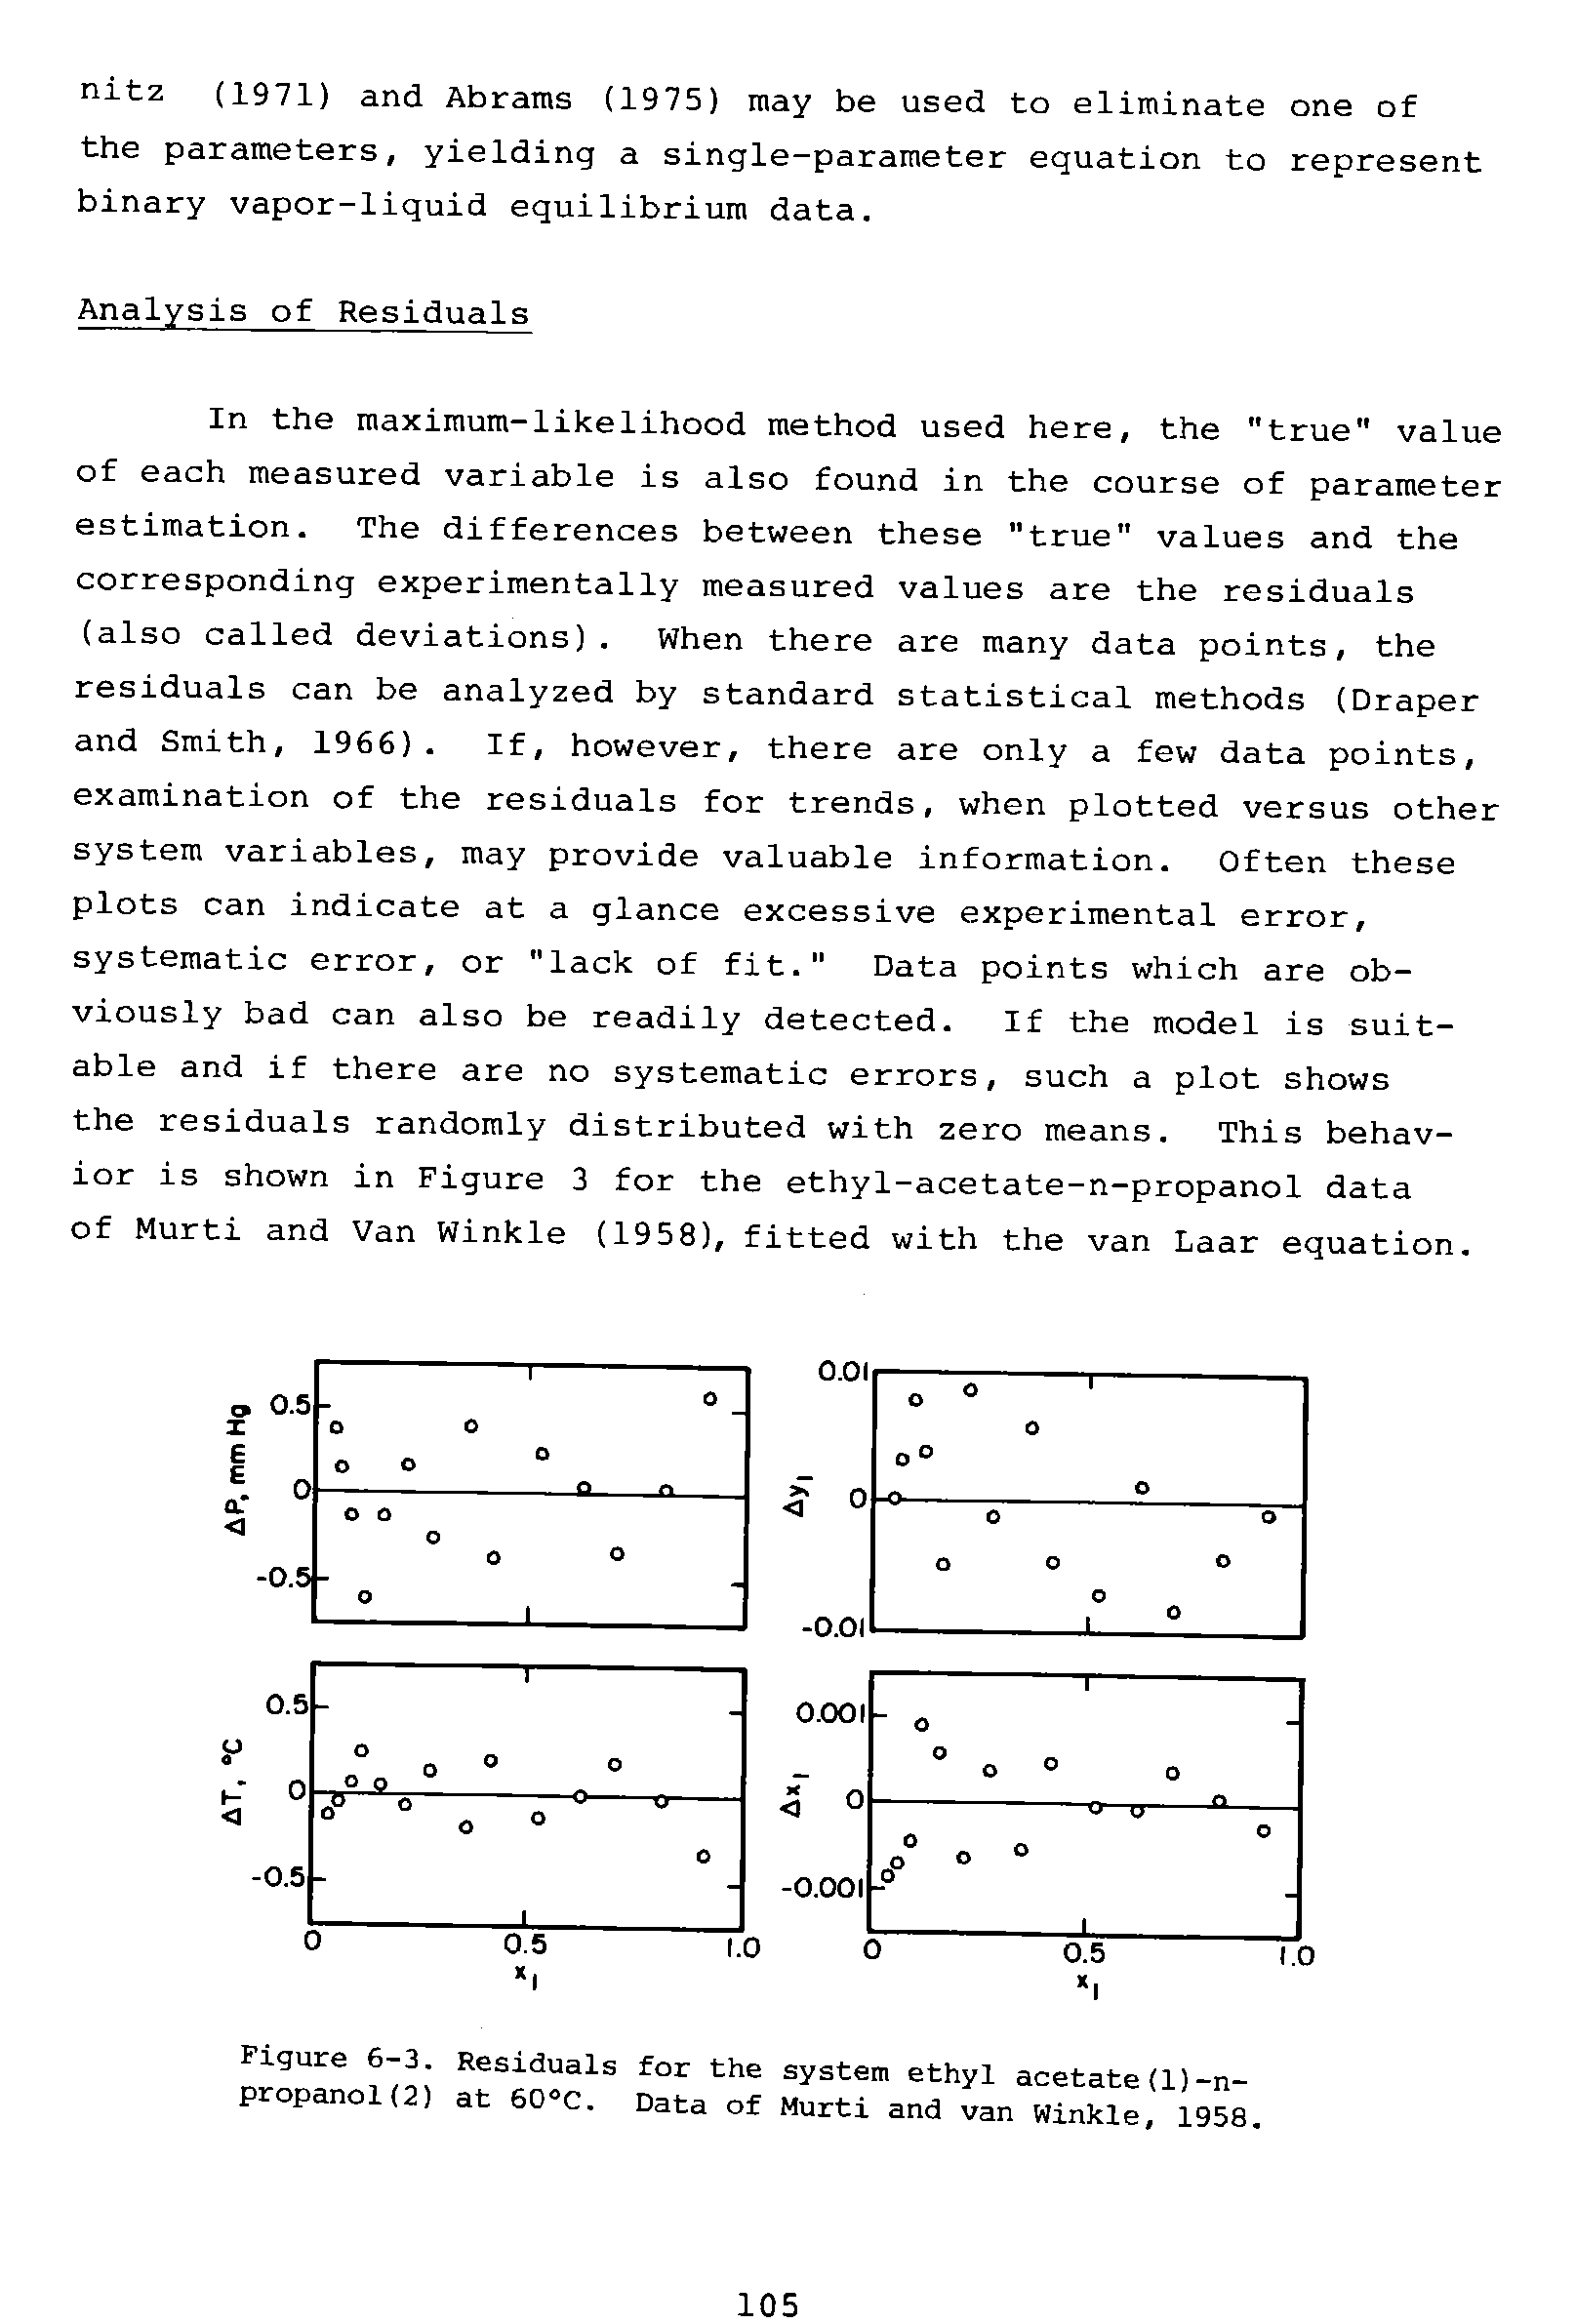 Figure 6-3. Residuals for the system ethyl acetate(1)-n-propanol(2) at eooc. Data of Murti and van Winkle, 1958.